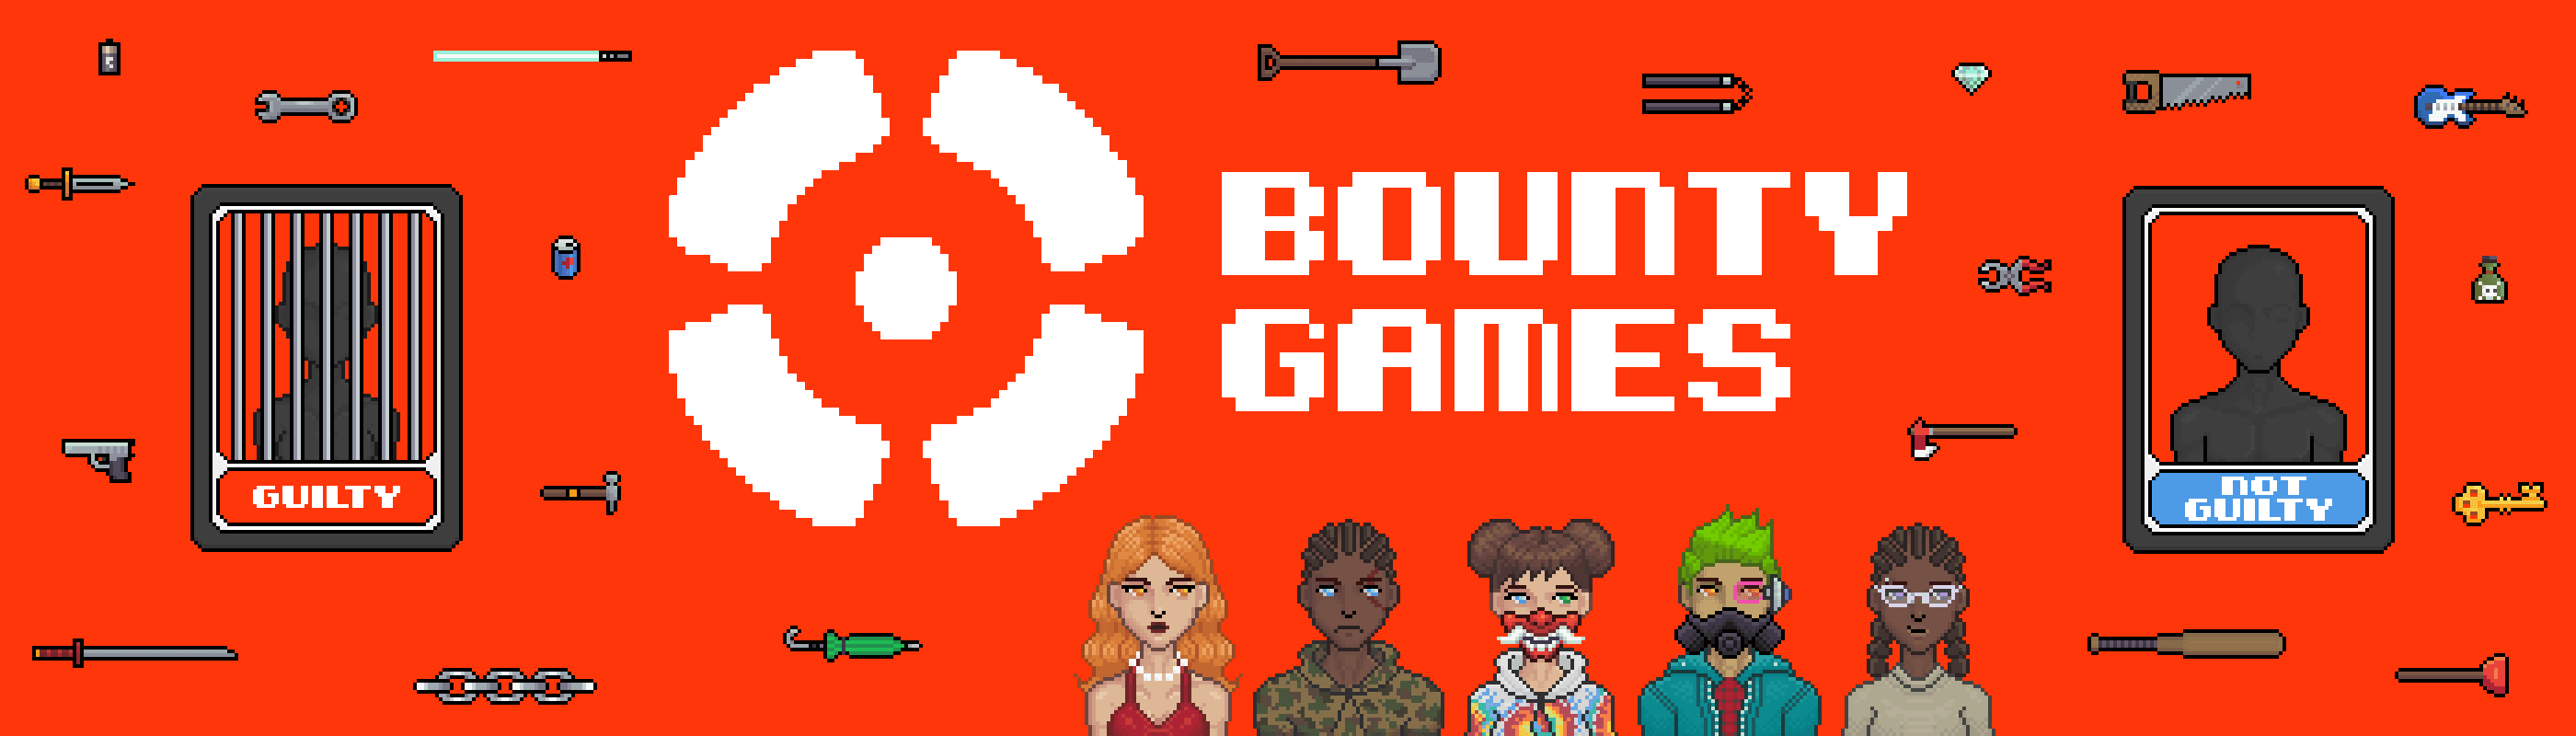 Bounty Games Round 1 (ENDED)